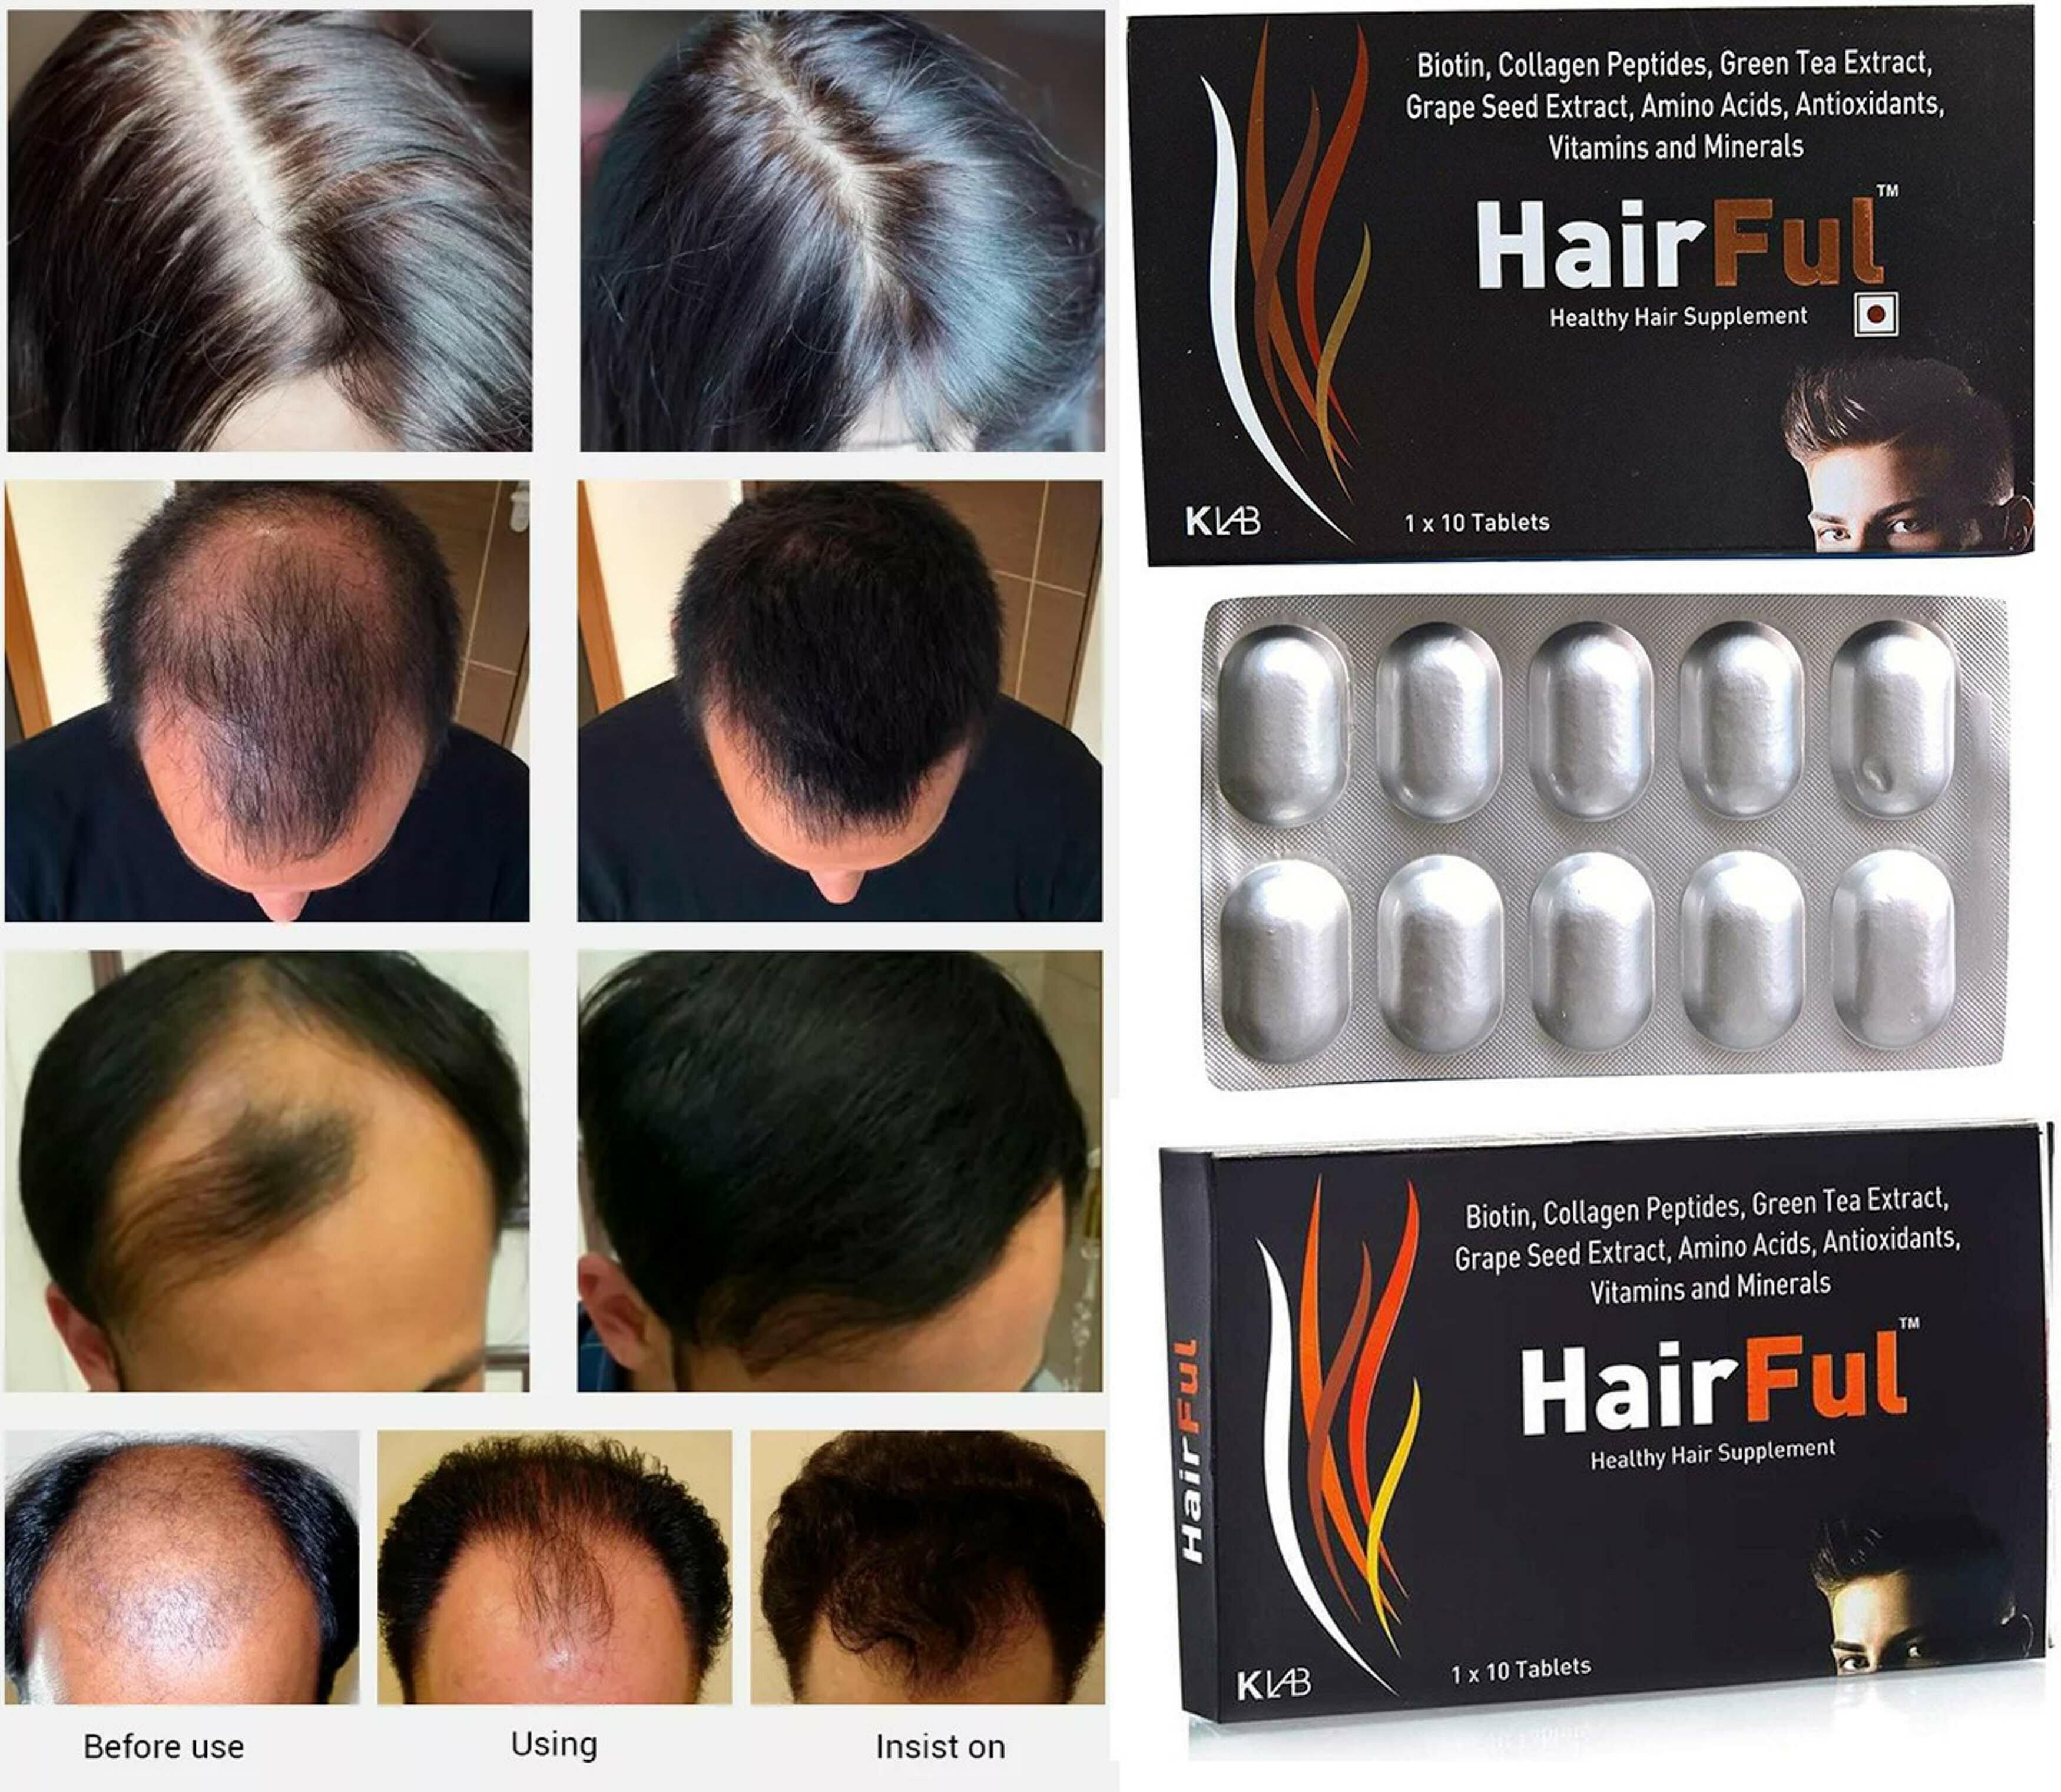 HairFul Healthy Hair Supplement Price in India  Buy HairFul Healthy Hair  Supplement online at Flipkartcom